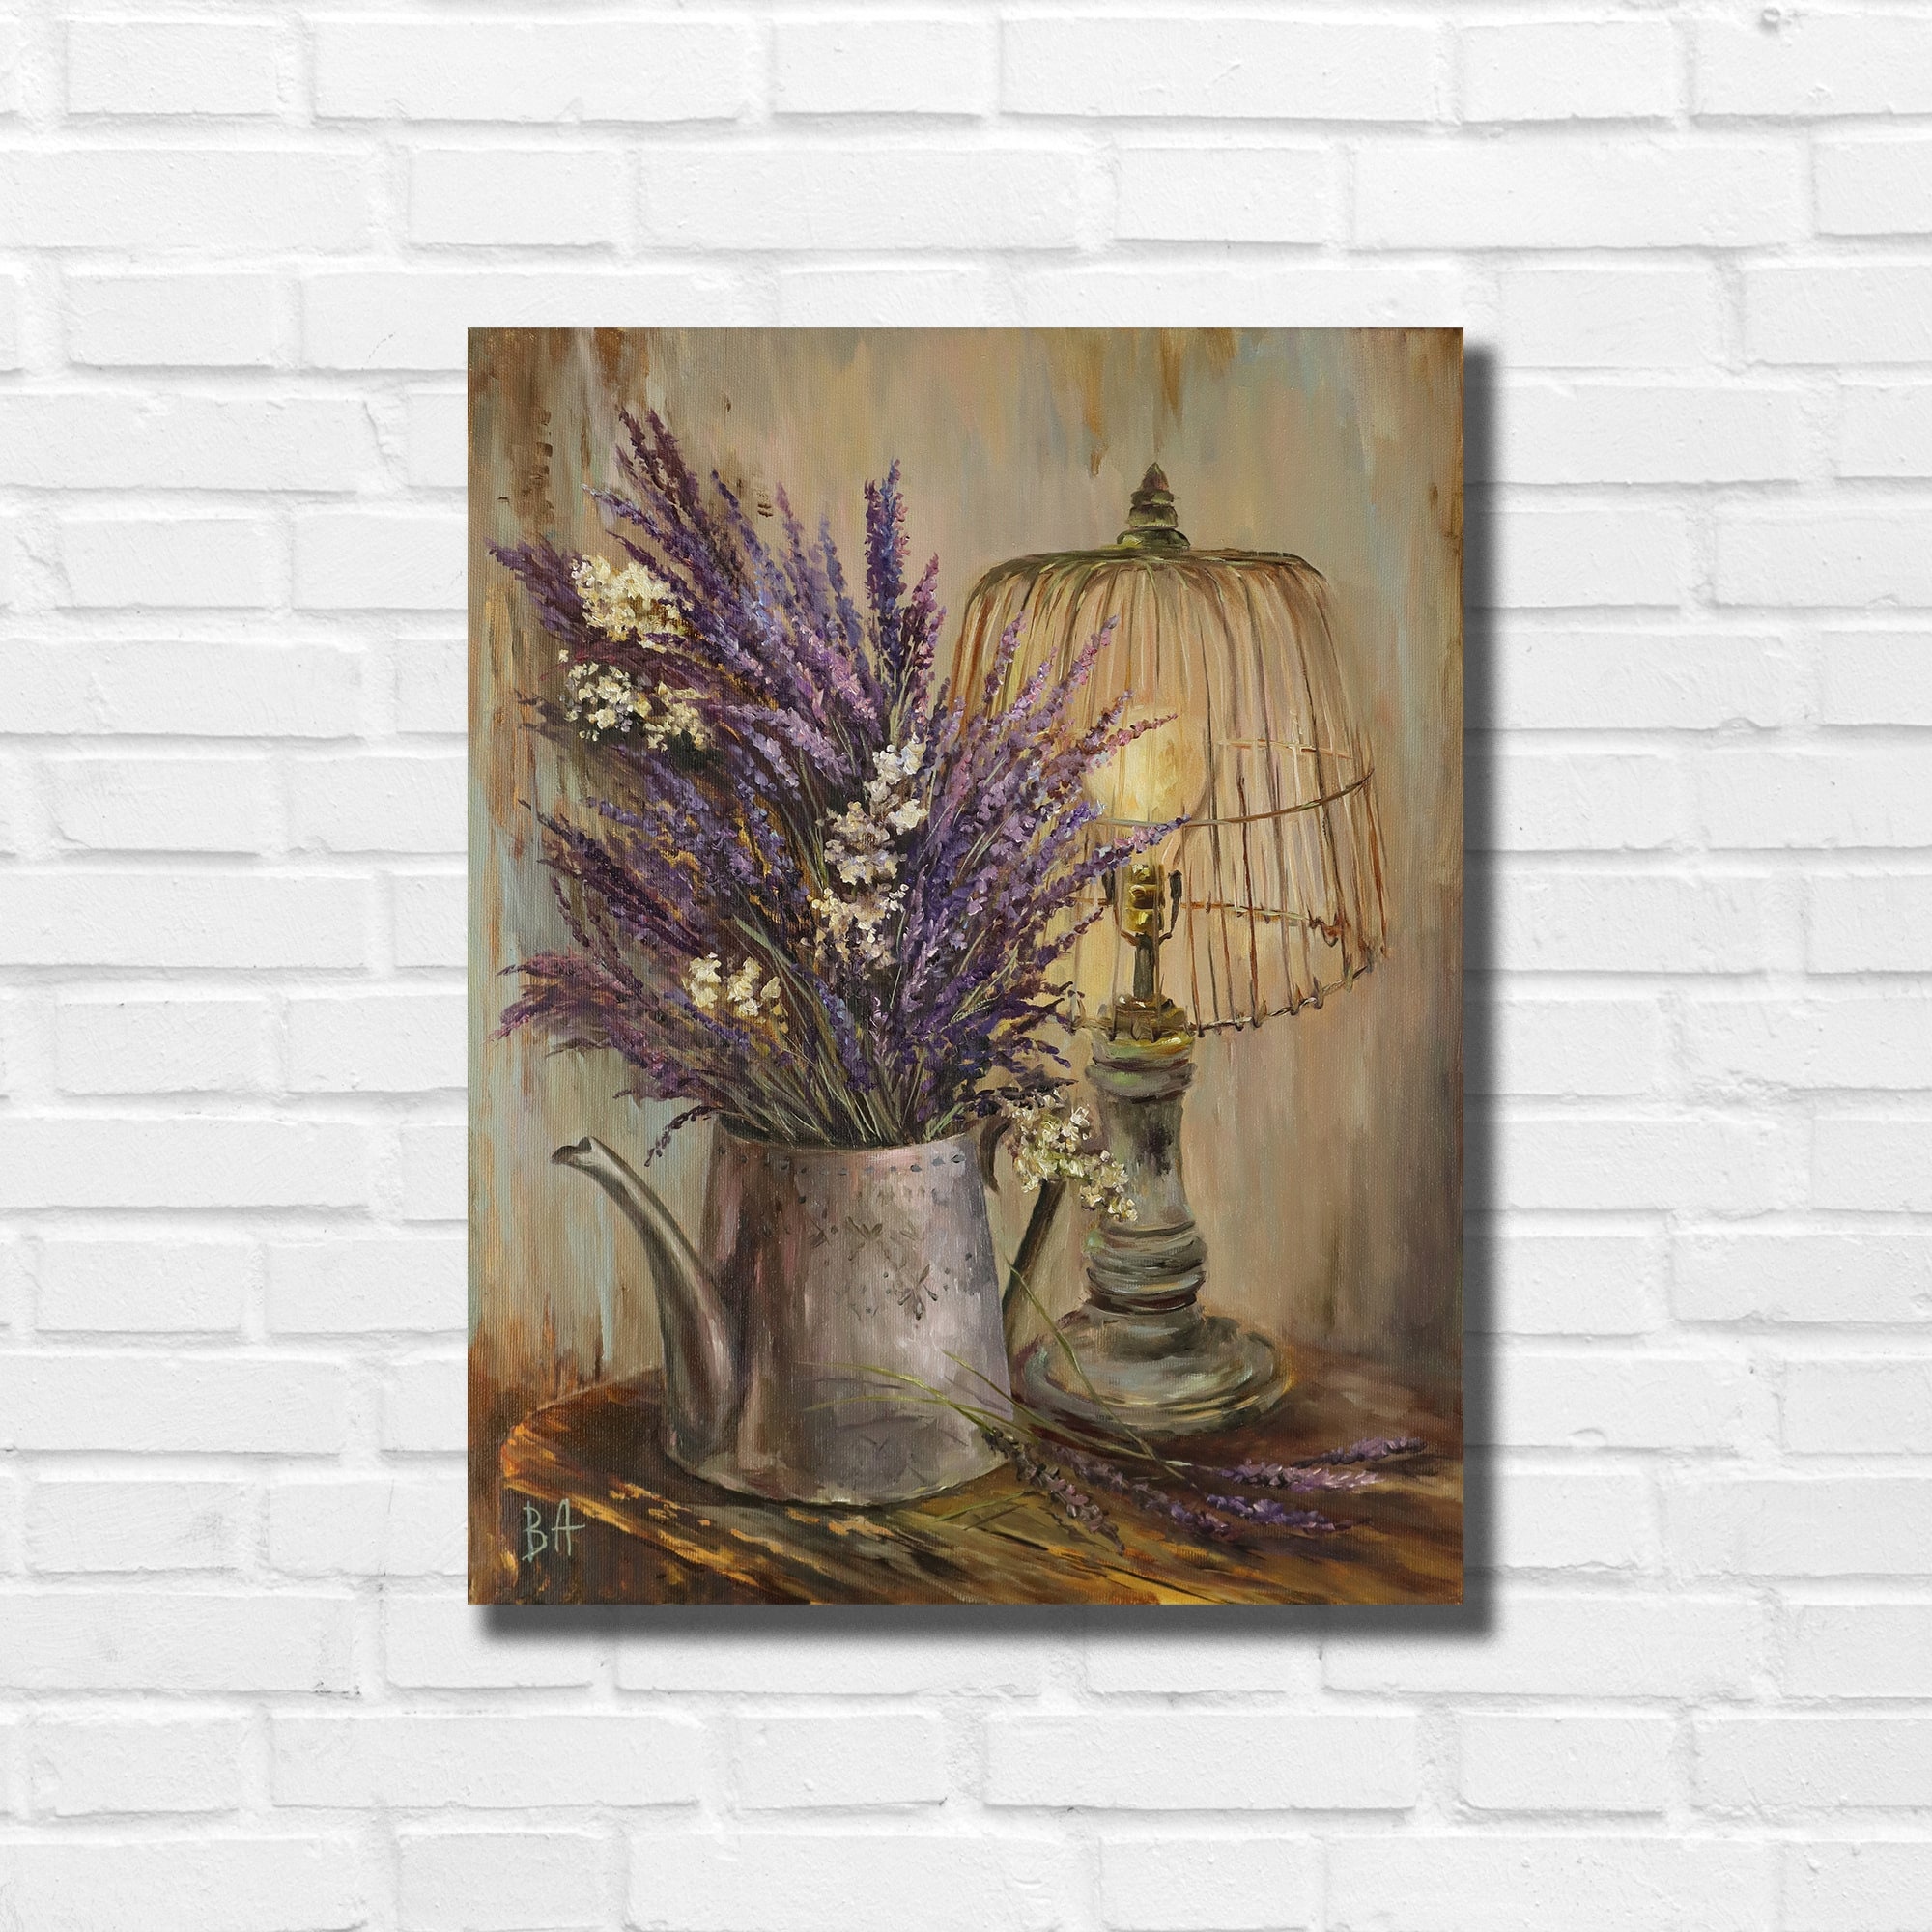 Beautiful Still Life Painting of Vintage Ornate Lavender Glass